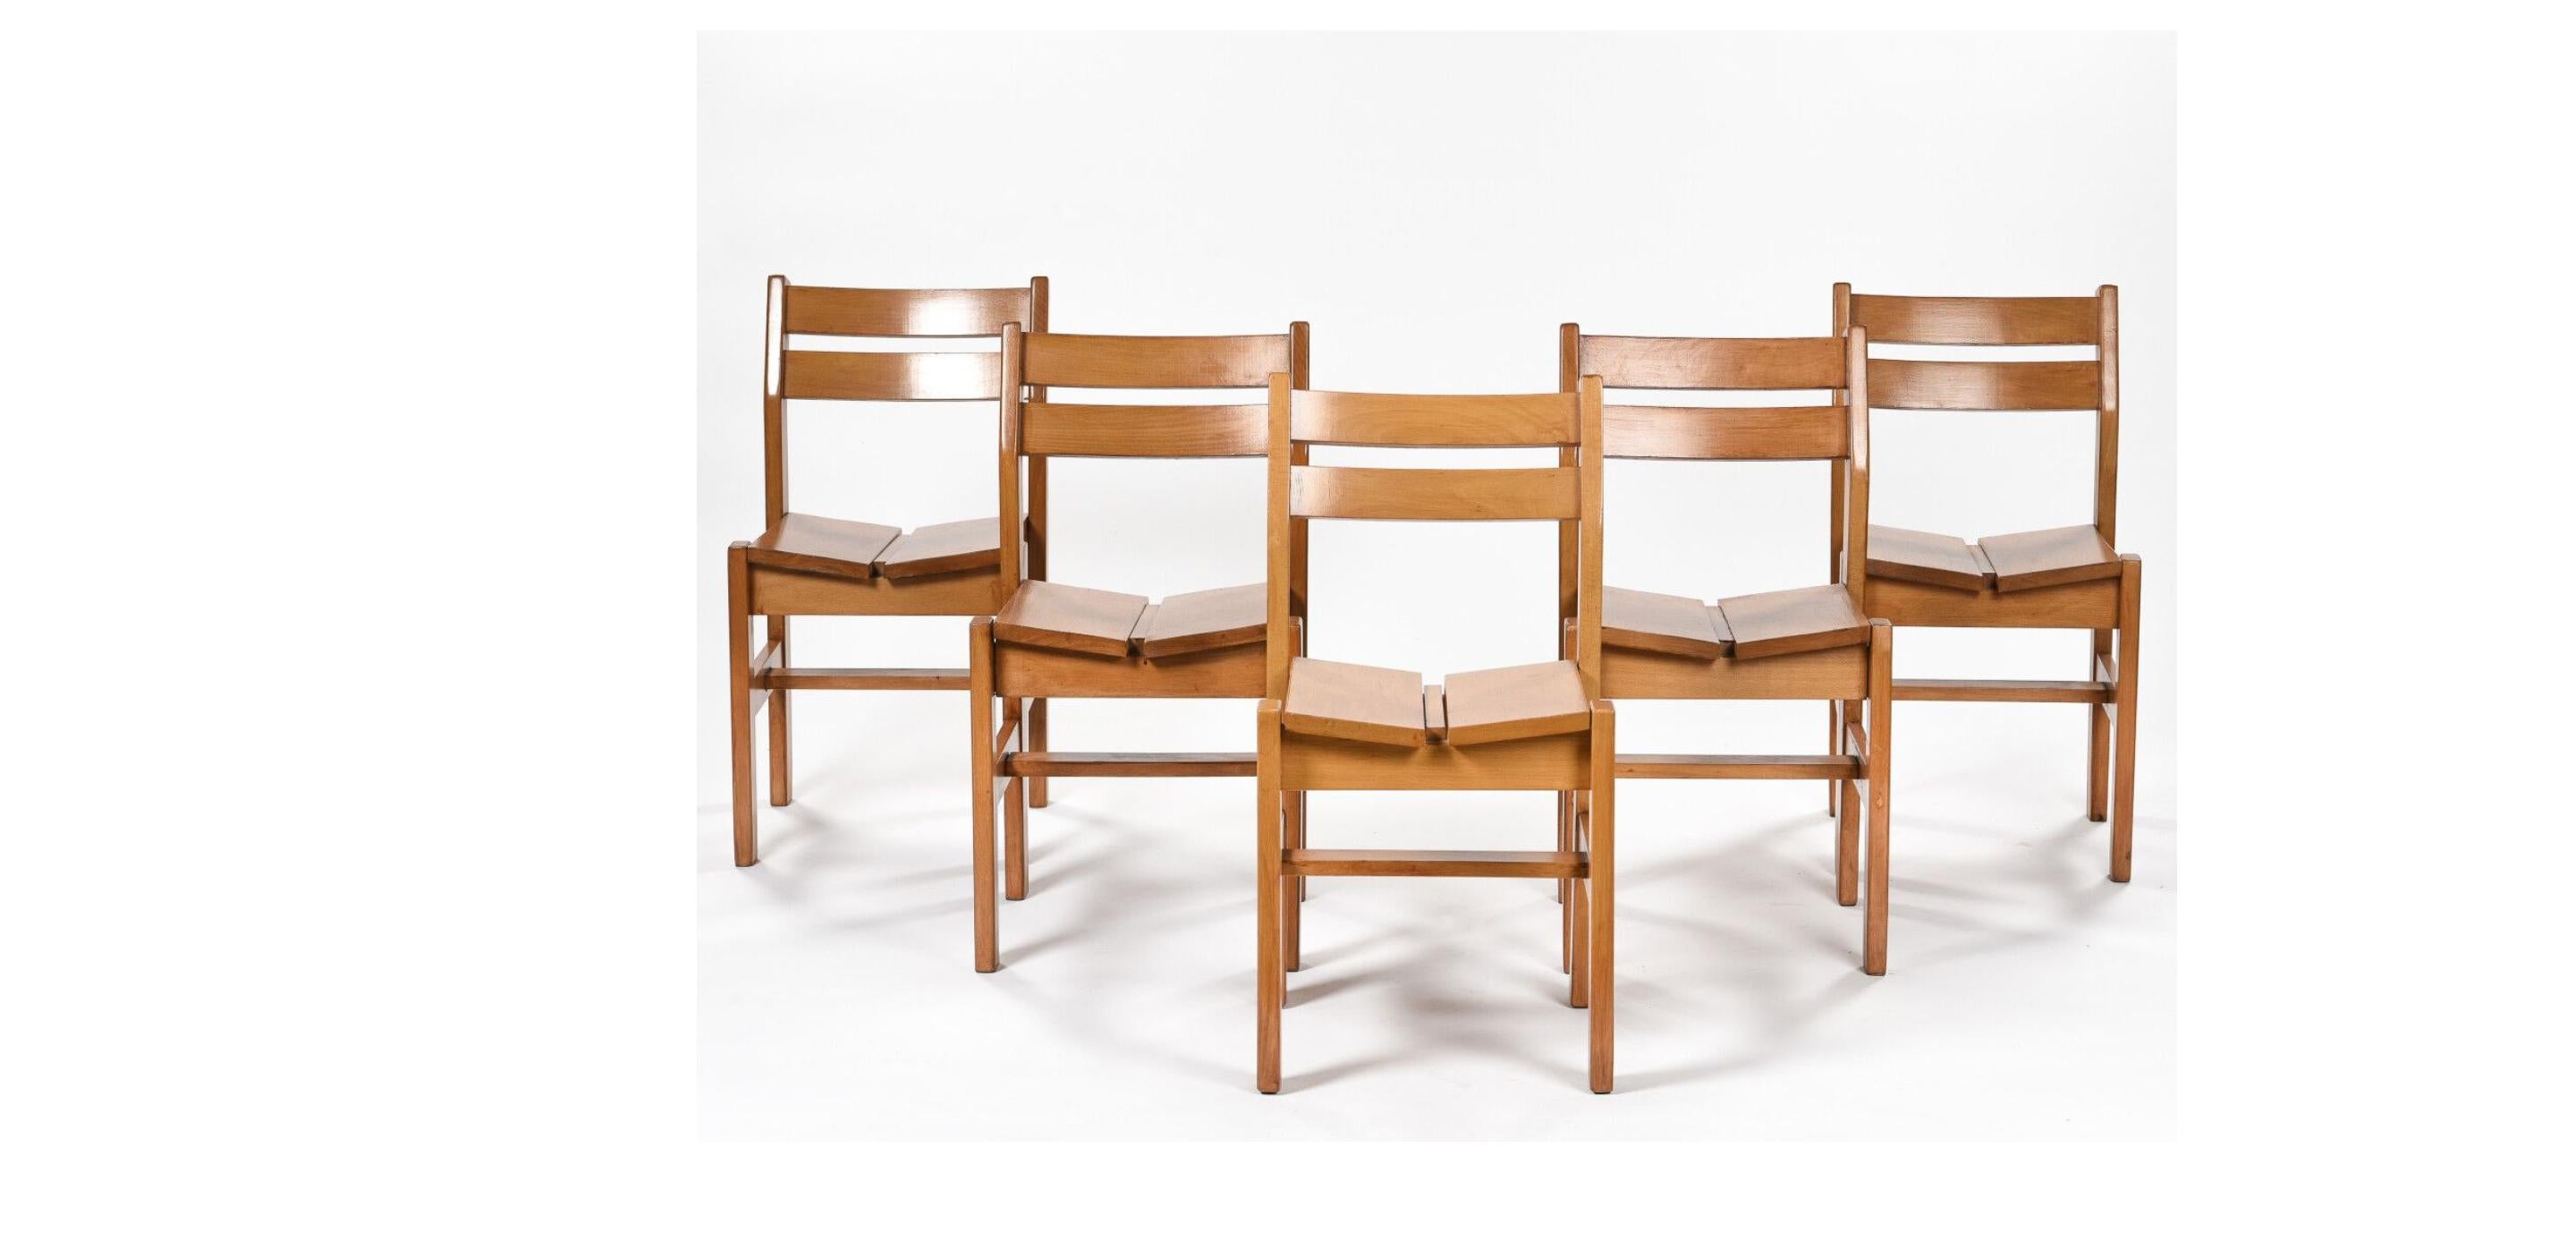 Mid-20th Century French Dining Chairs in Solid Elm in style of Charlotte Perriand Produced, 1960s